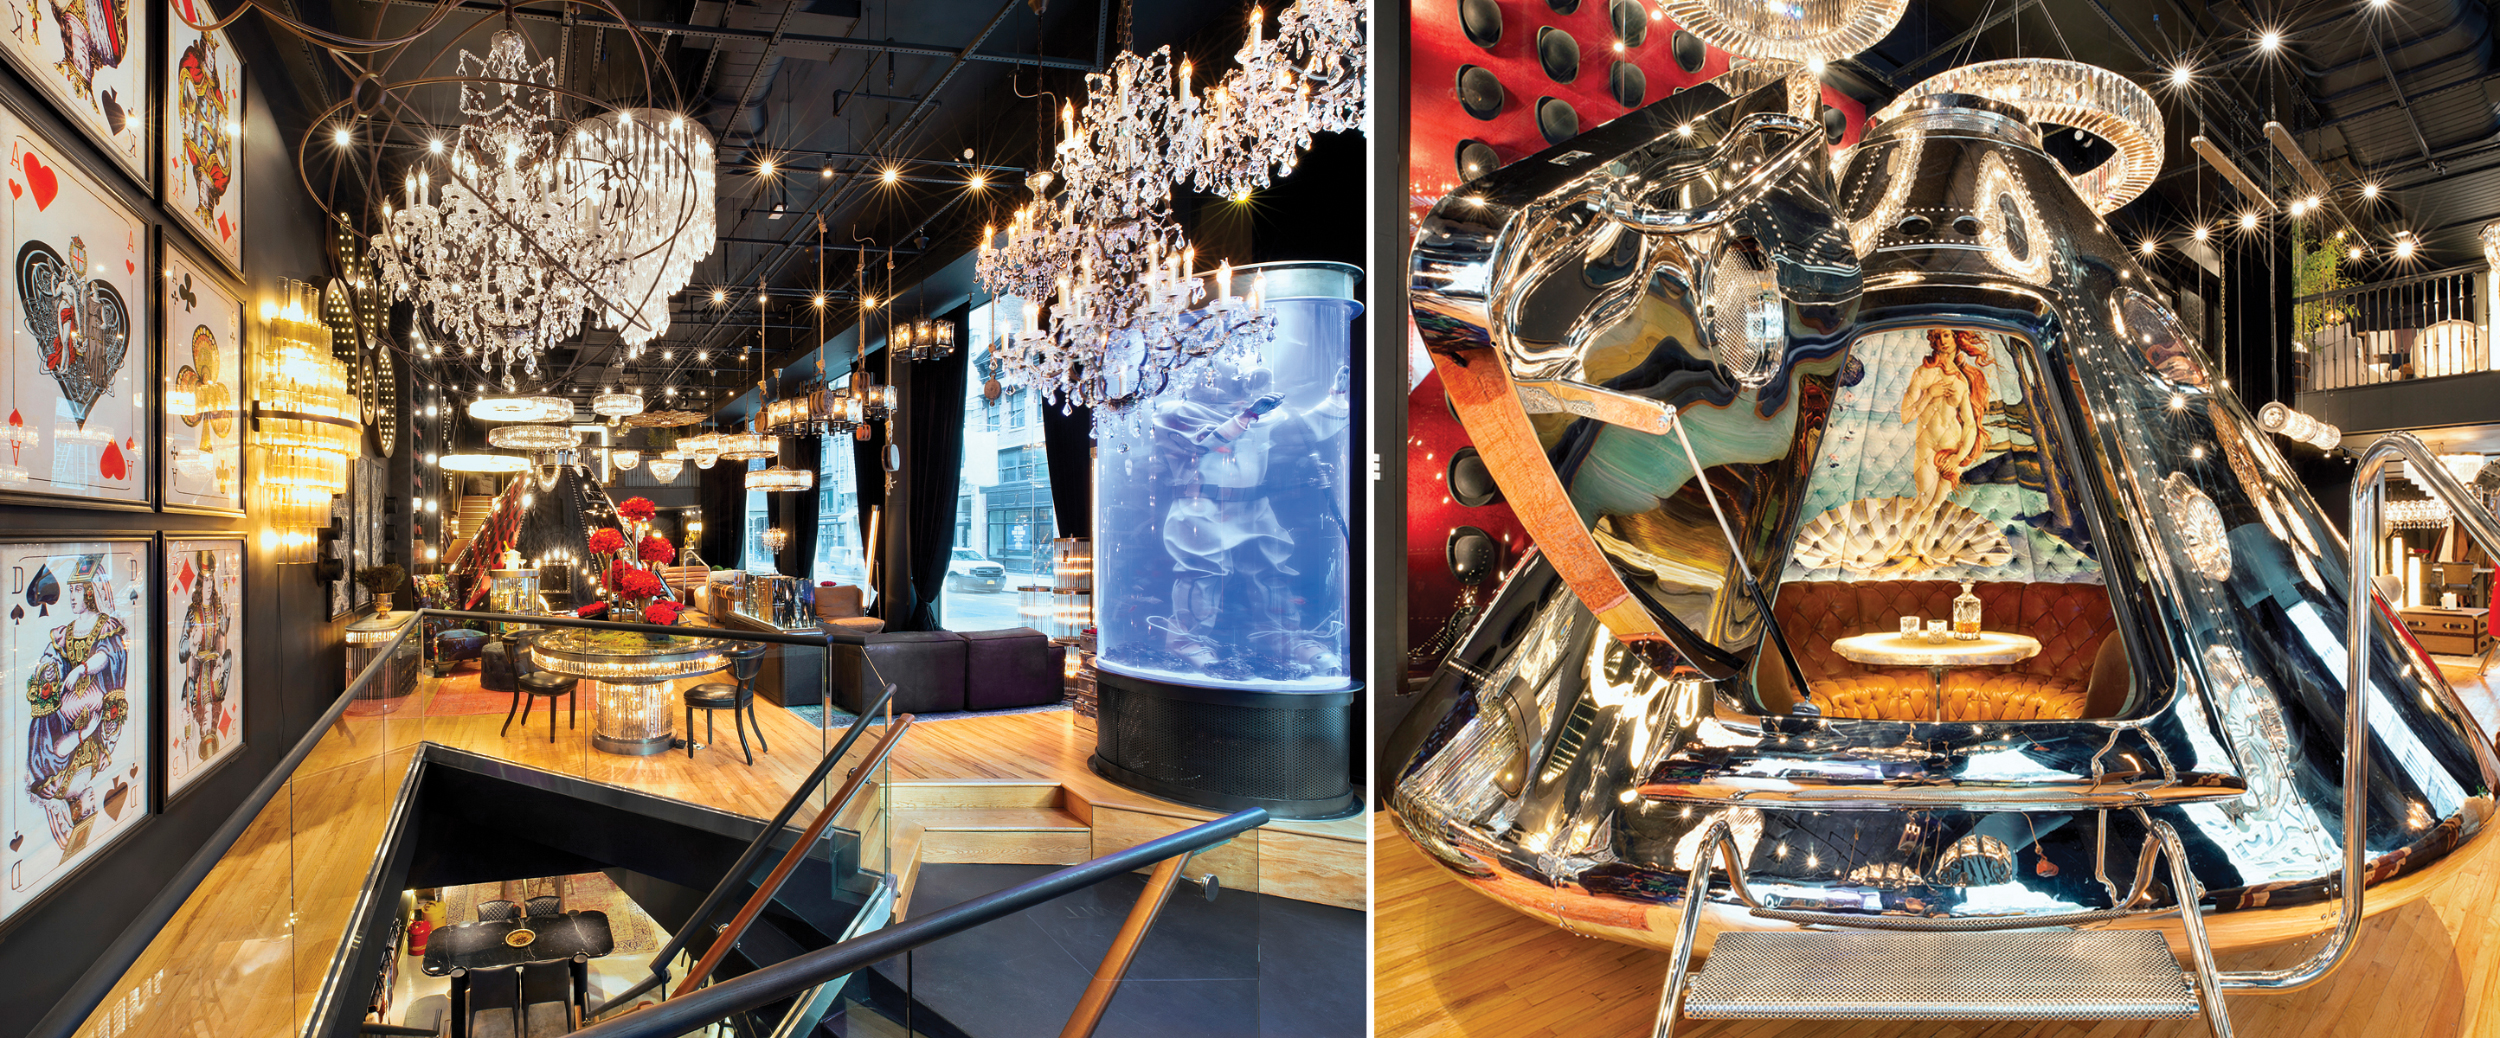 The three-ton aquarium (shown right) is just one of many unique and unusual props found throughout the flagship.